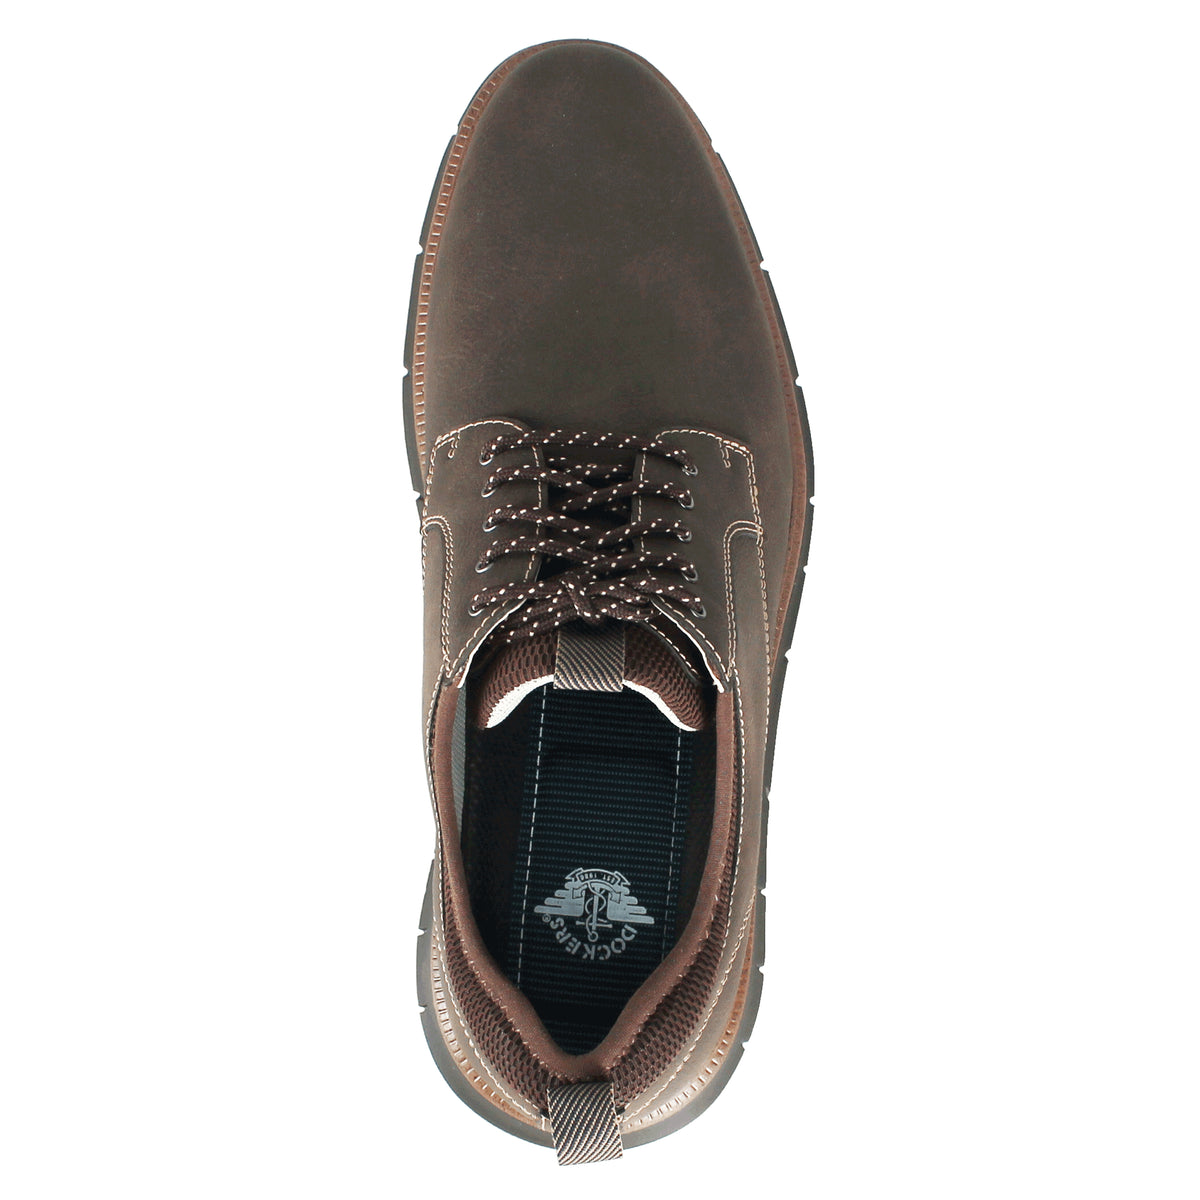 Dockers Shoes Cooper Brown Shoes